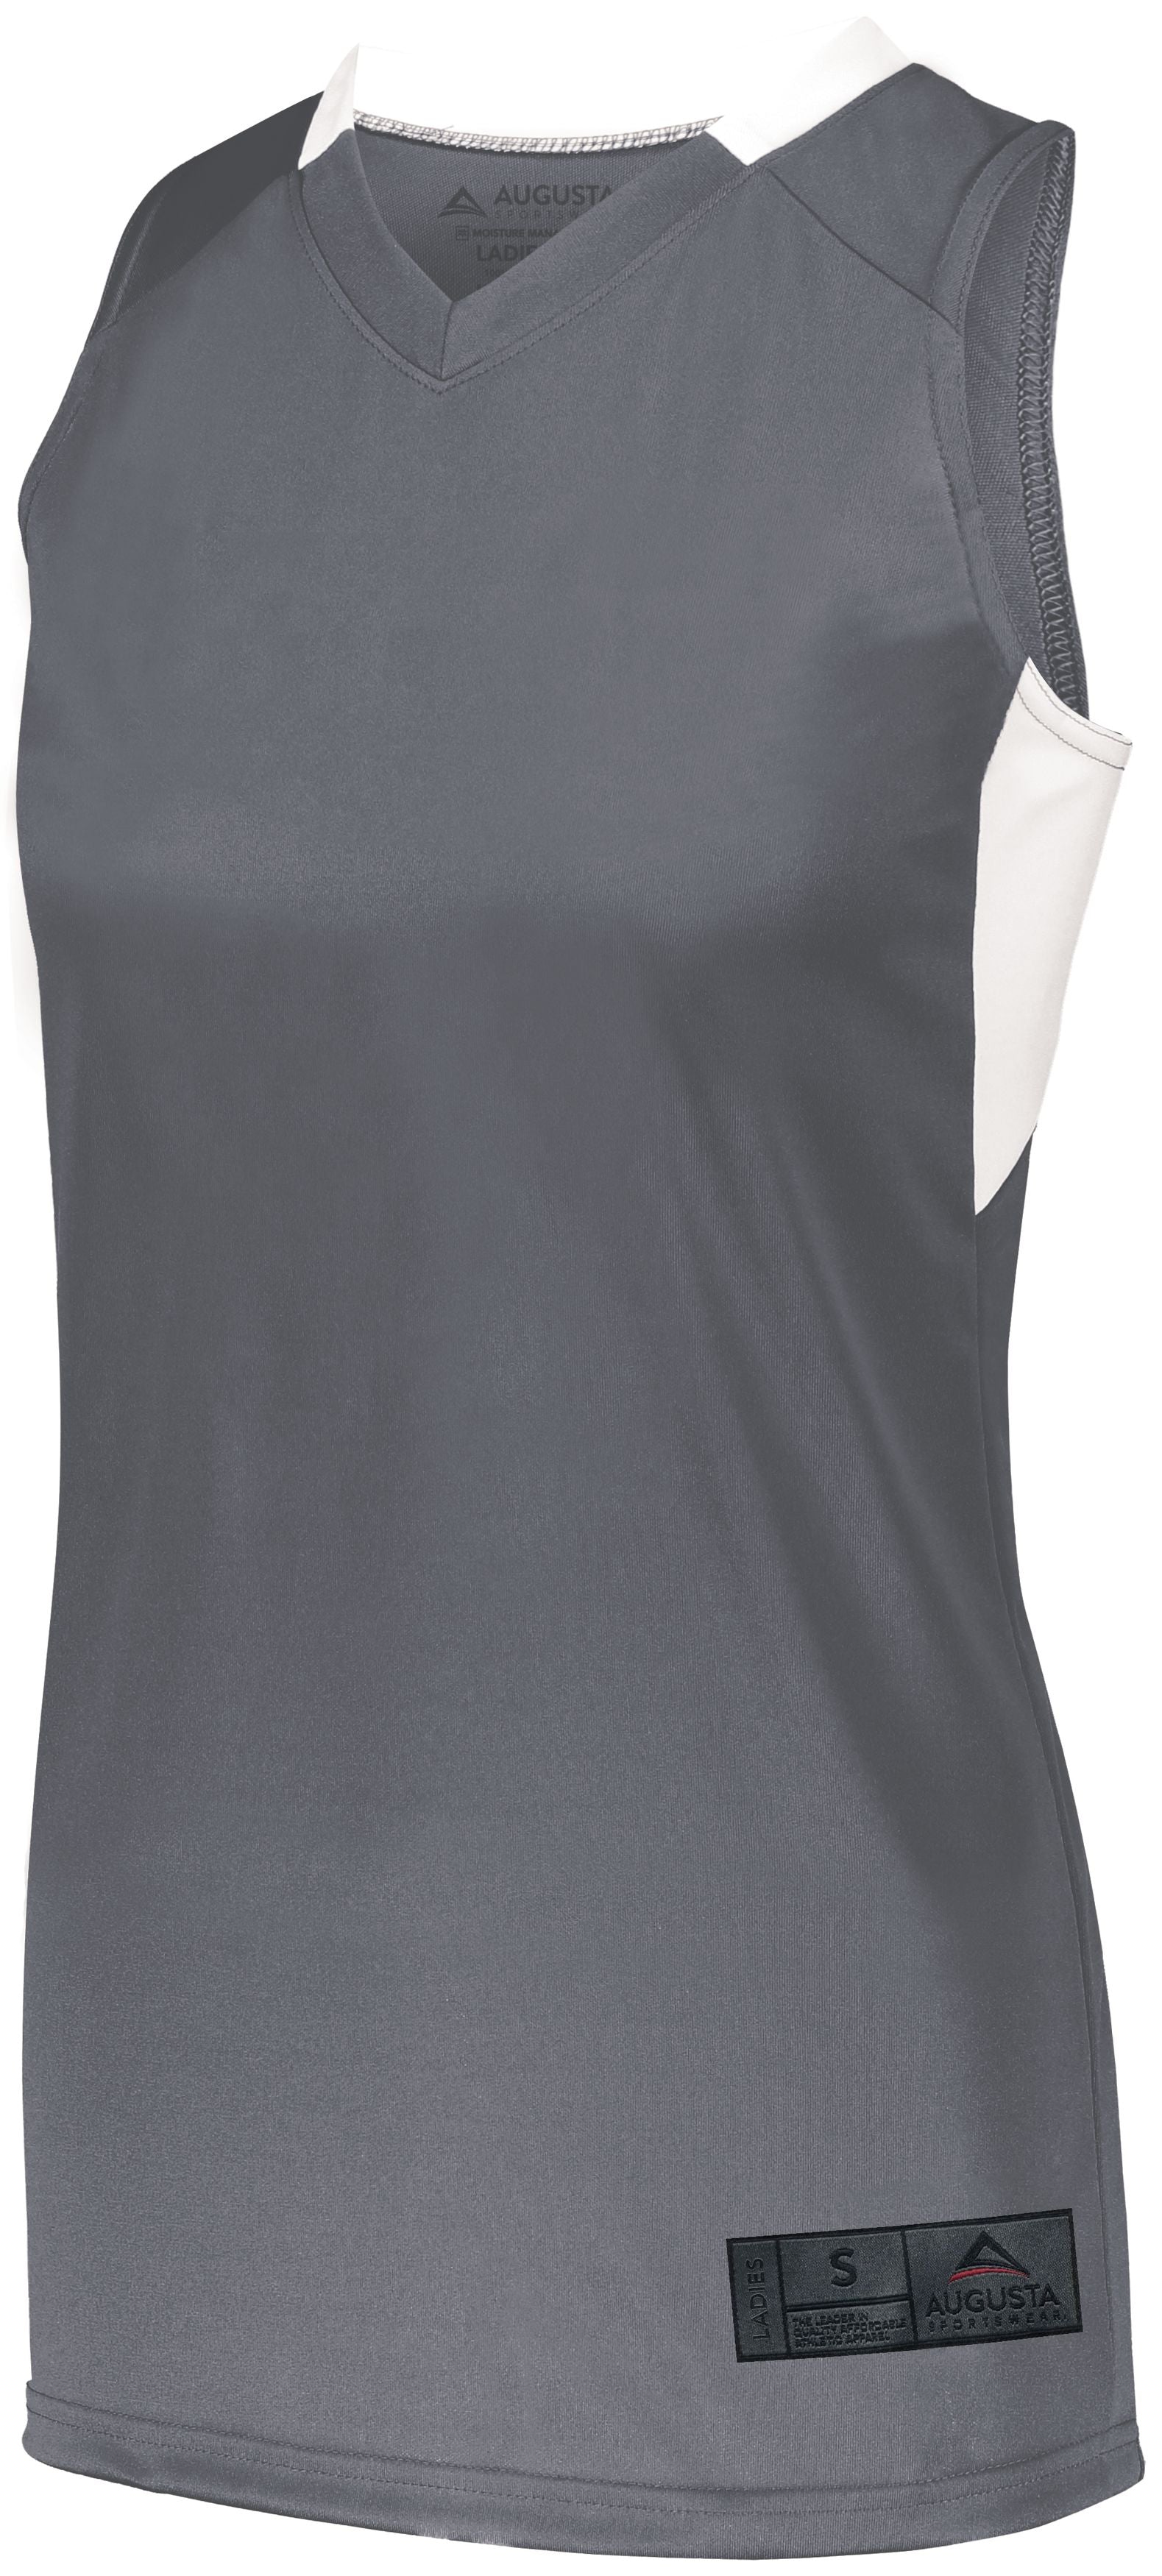 Augusta Sportswear Ladies Step-Back Basketball Jersey in Graphite/White  -Part of the Ladies, Ladies-Jersey, Augusta-Products, Basketball, Shirts, All-Sports, All-Sports-1 product lines at KanaleyCreations.com